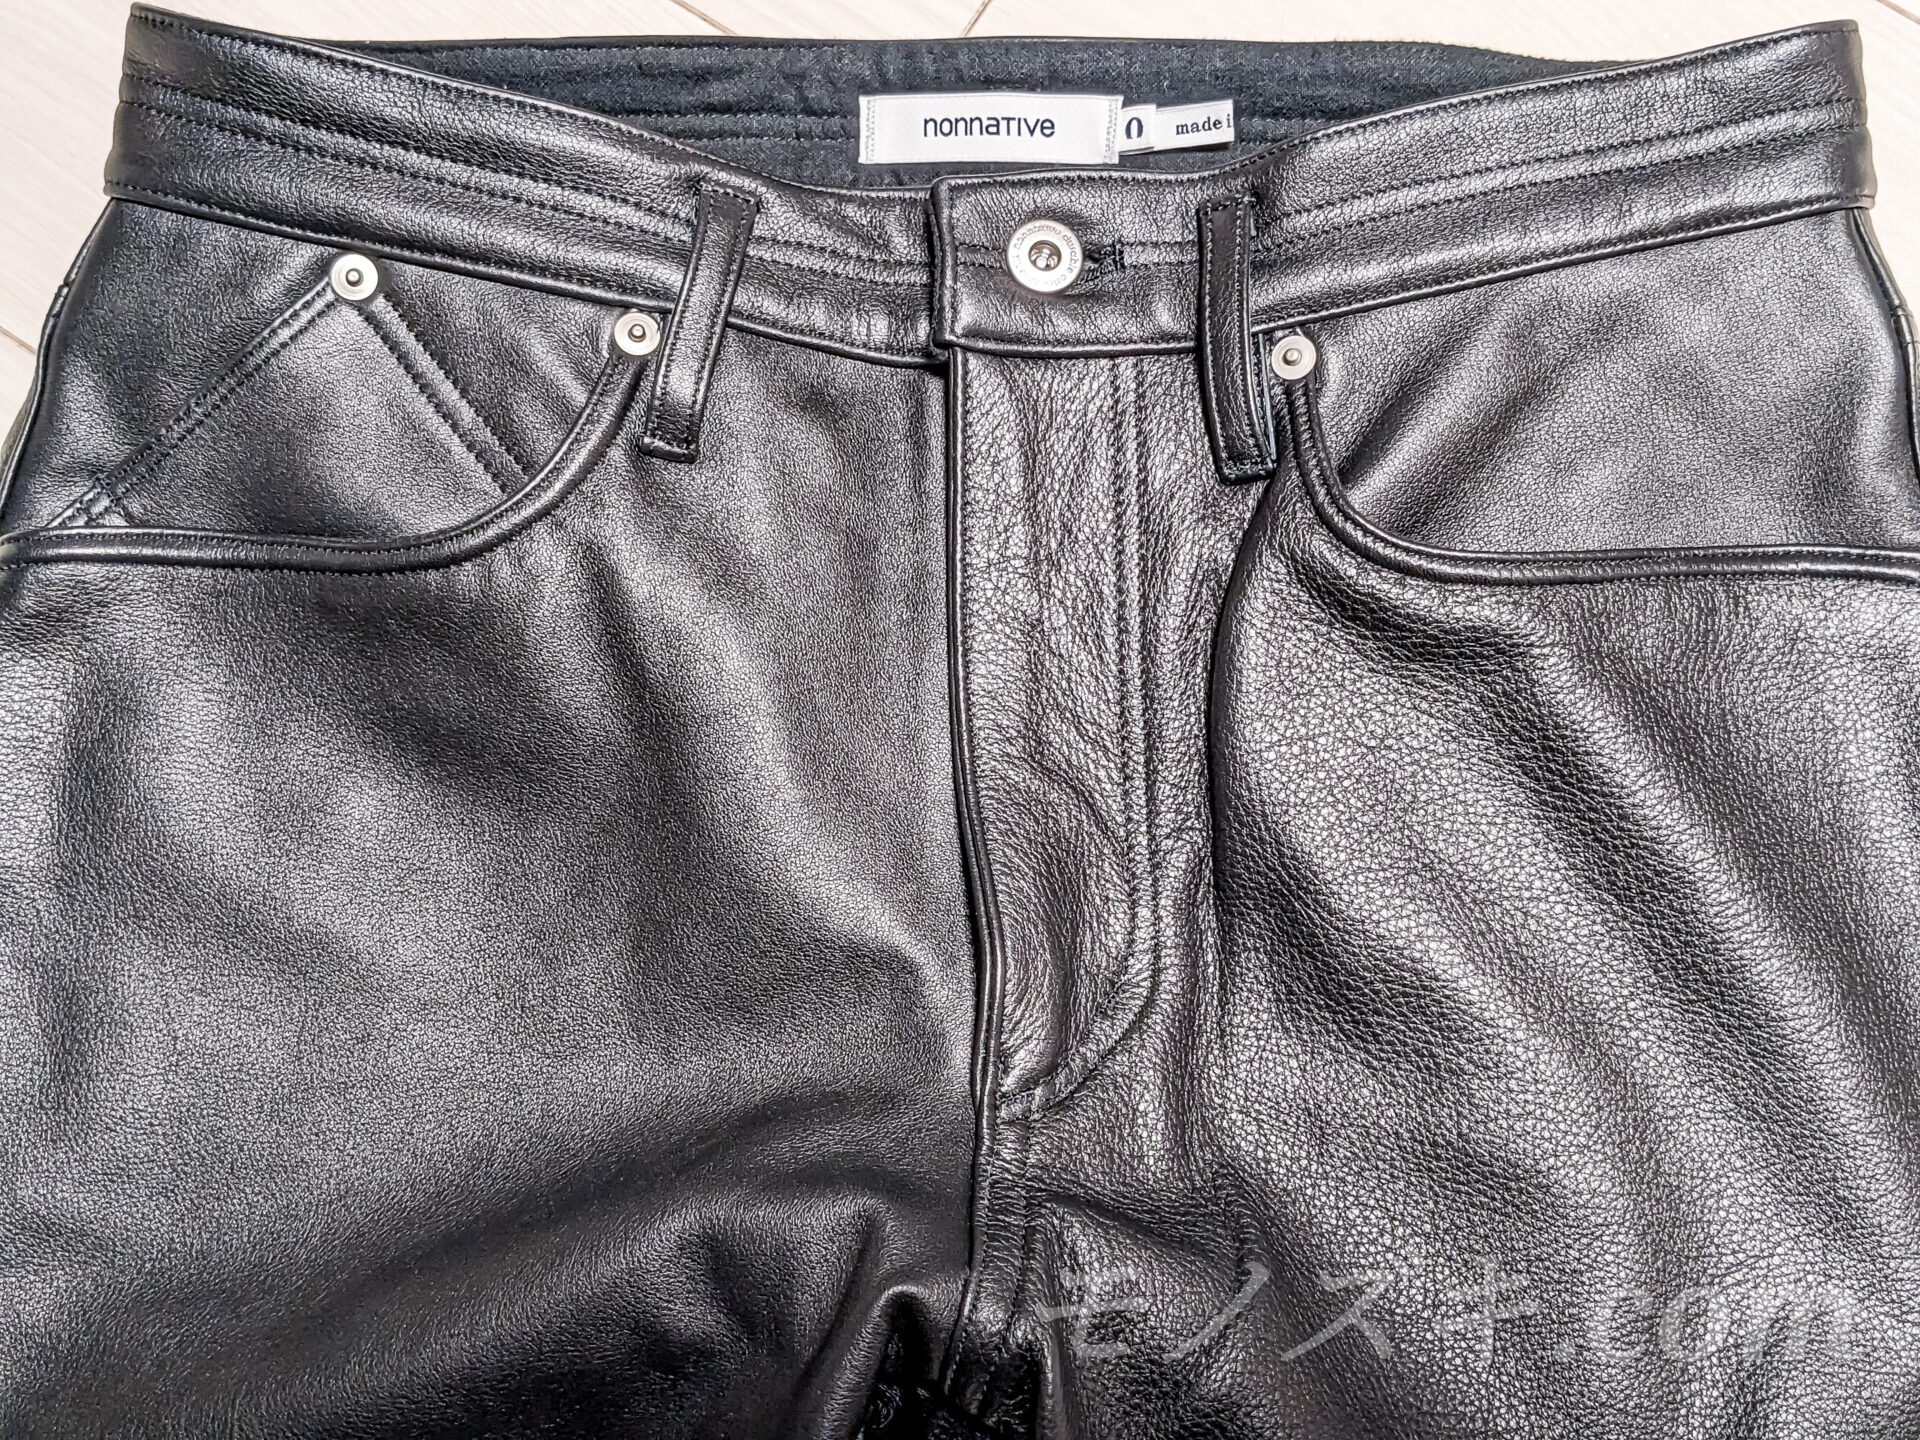 DWELLER 5P JEANS 01 COW LEATHER サムネイル